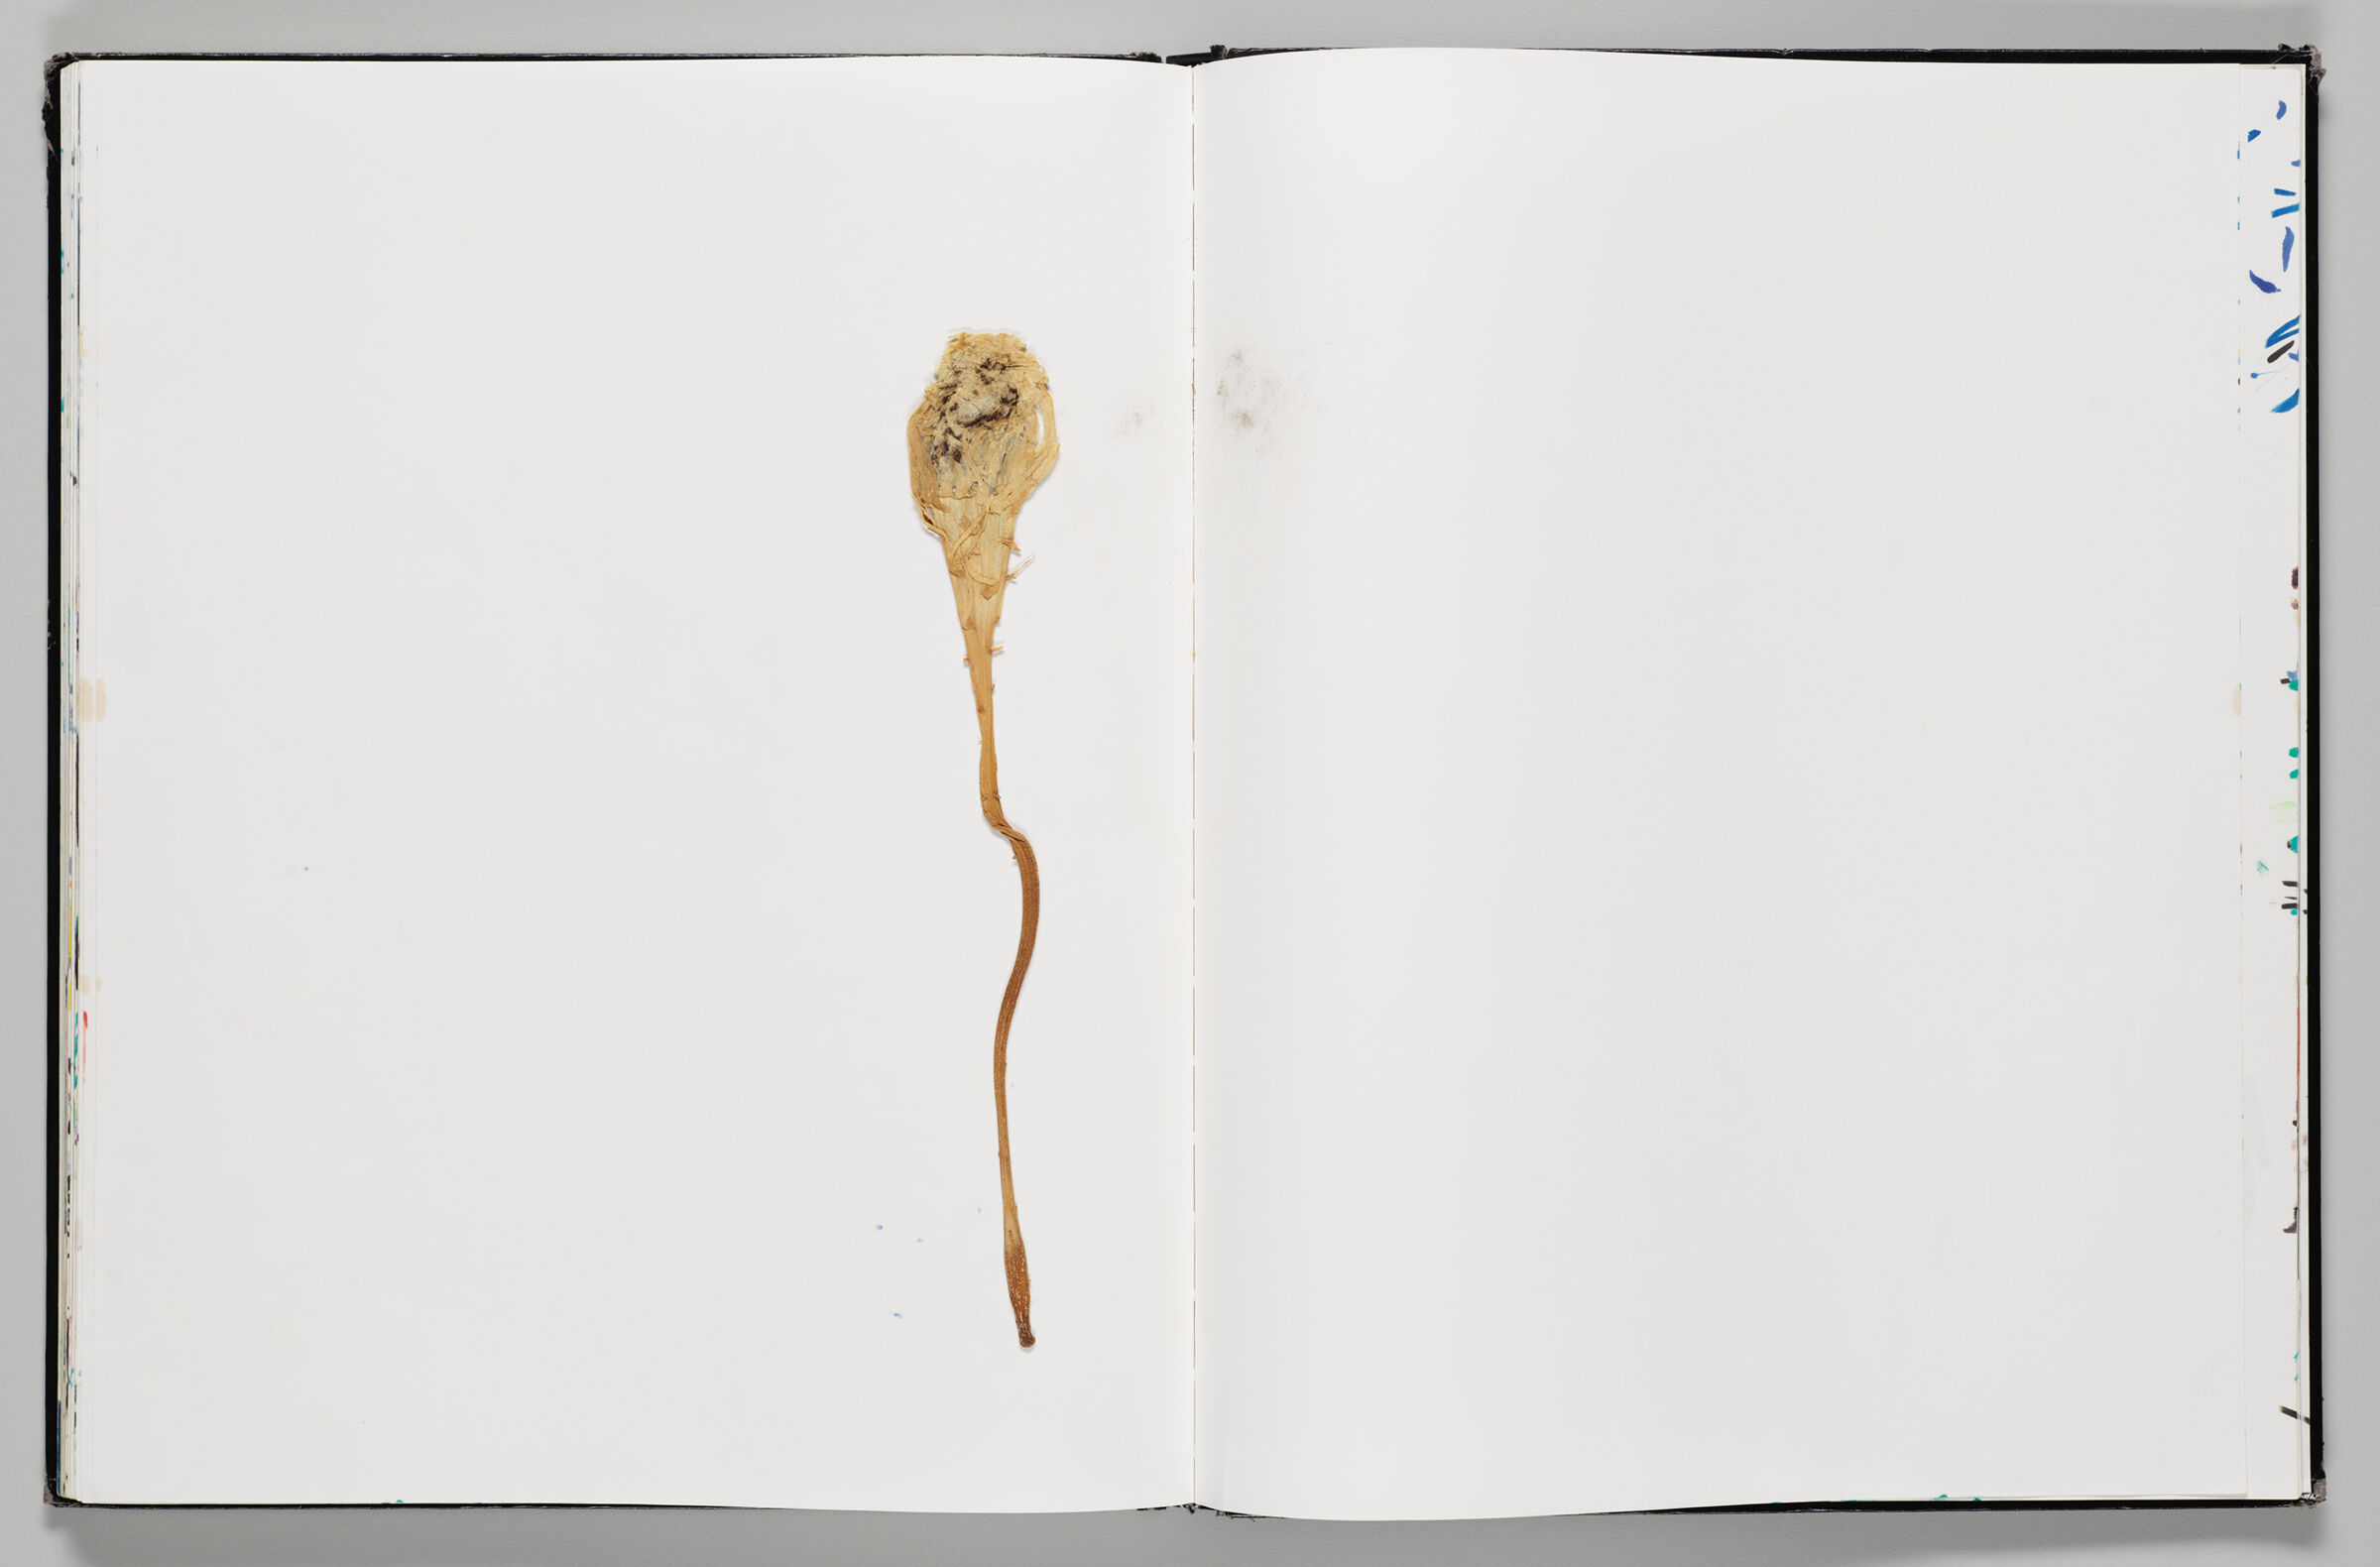 Untitled (Blank, Left Page); Untitled (Blank With Faint Stain From Dried Flower, Right Page)